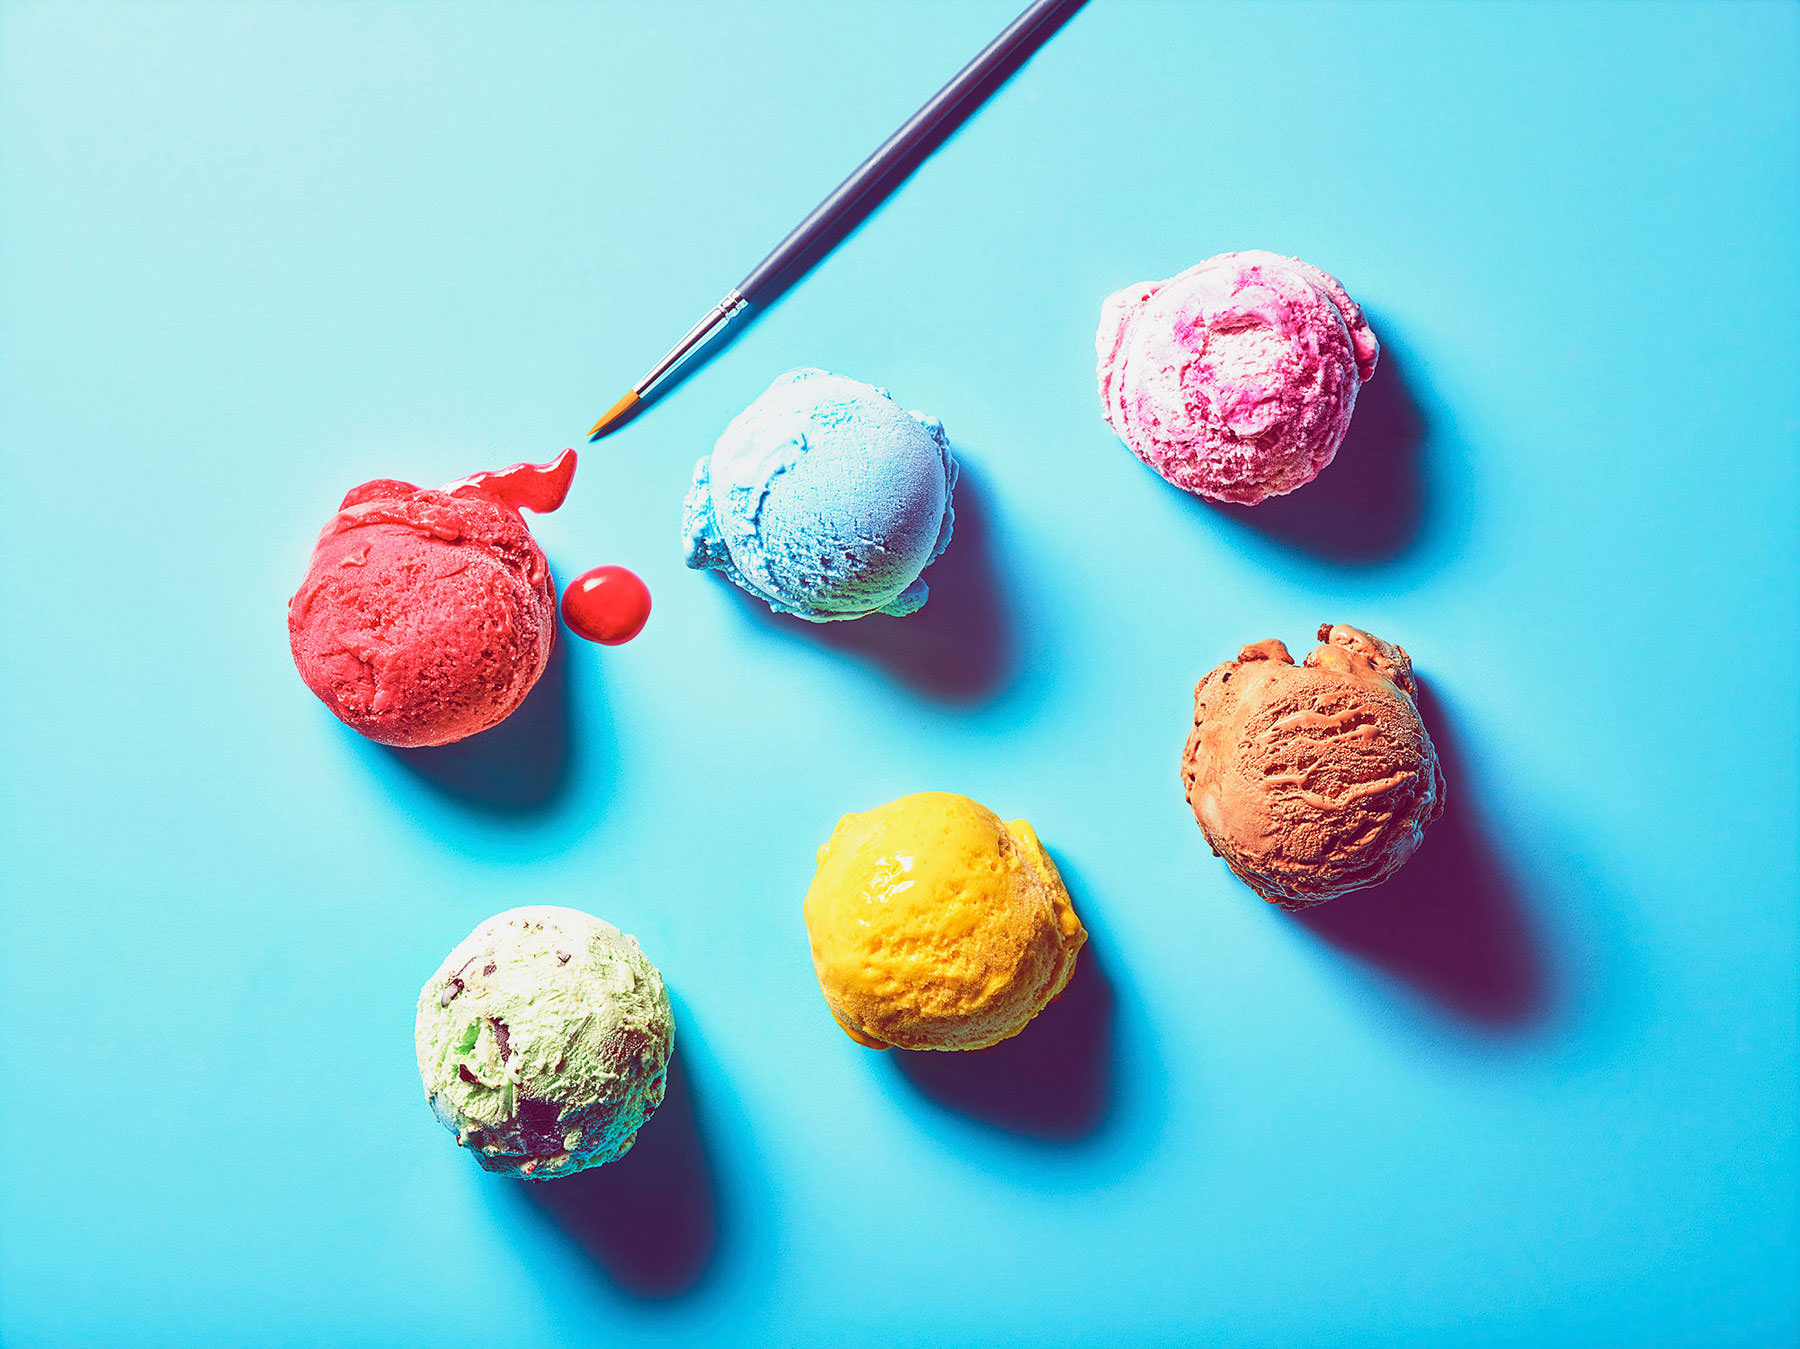 Flavoured gelato ice cream scoops placed on a bright blue background with a paintbrush - London Food & Drinks Photographer